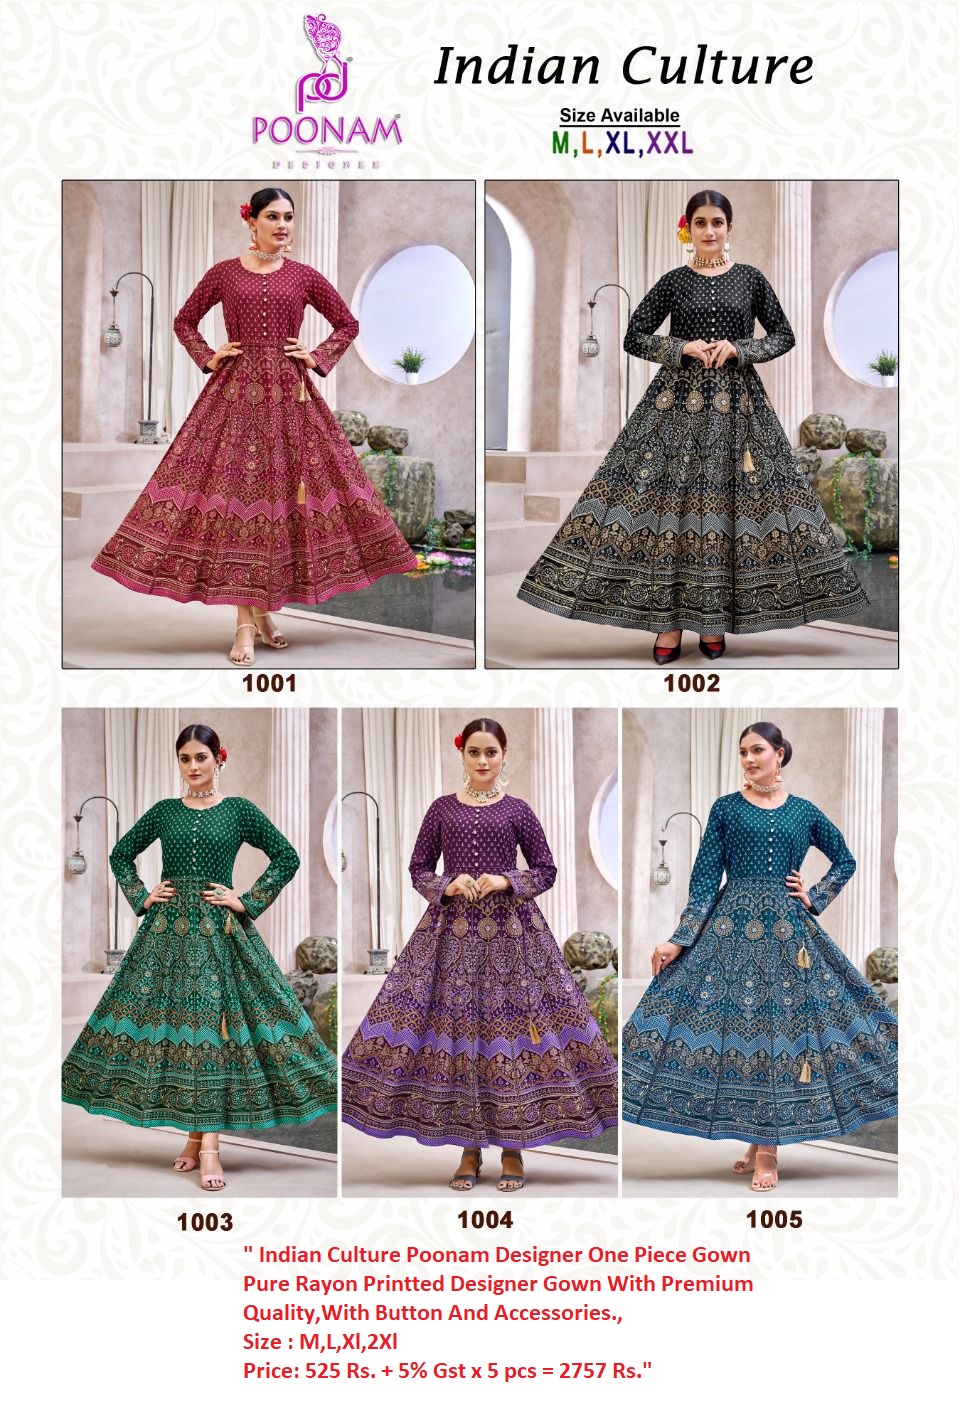 10 Trending Indian Outfits For Women Need to Wear 2022